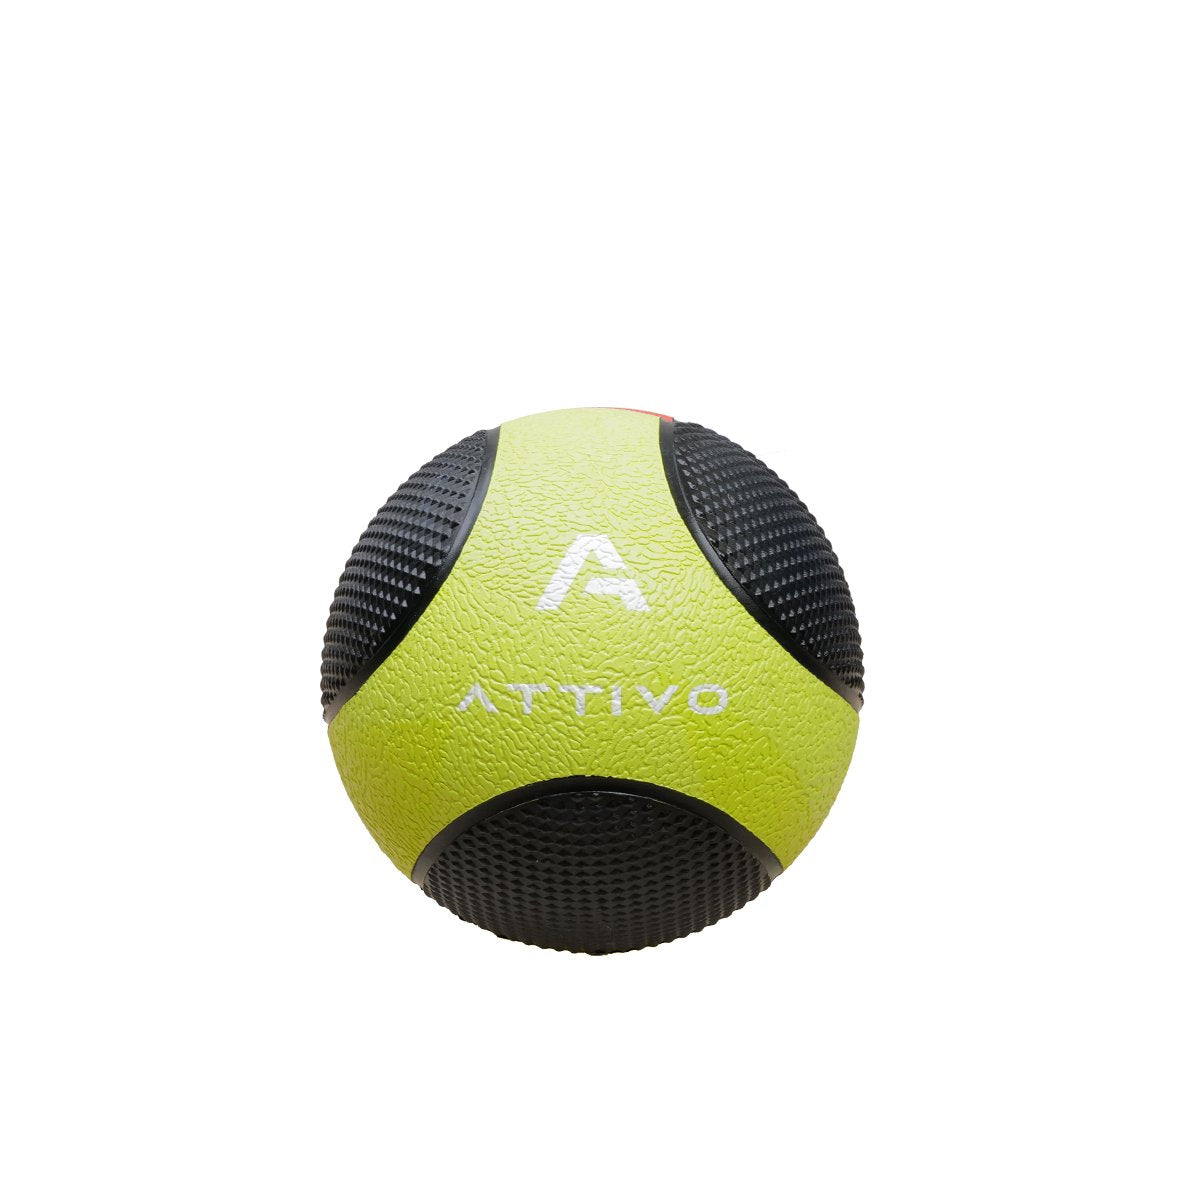 ATTIVO Medicine Ball for Workouts Exercise Balance Training - 5KG